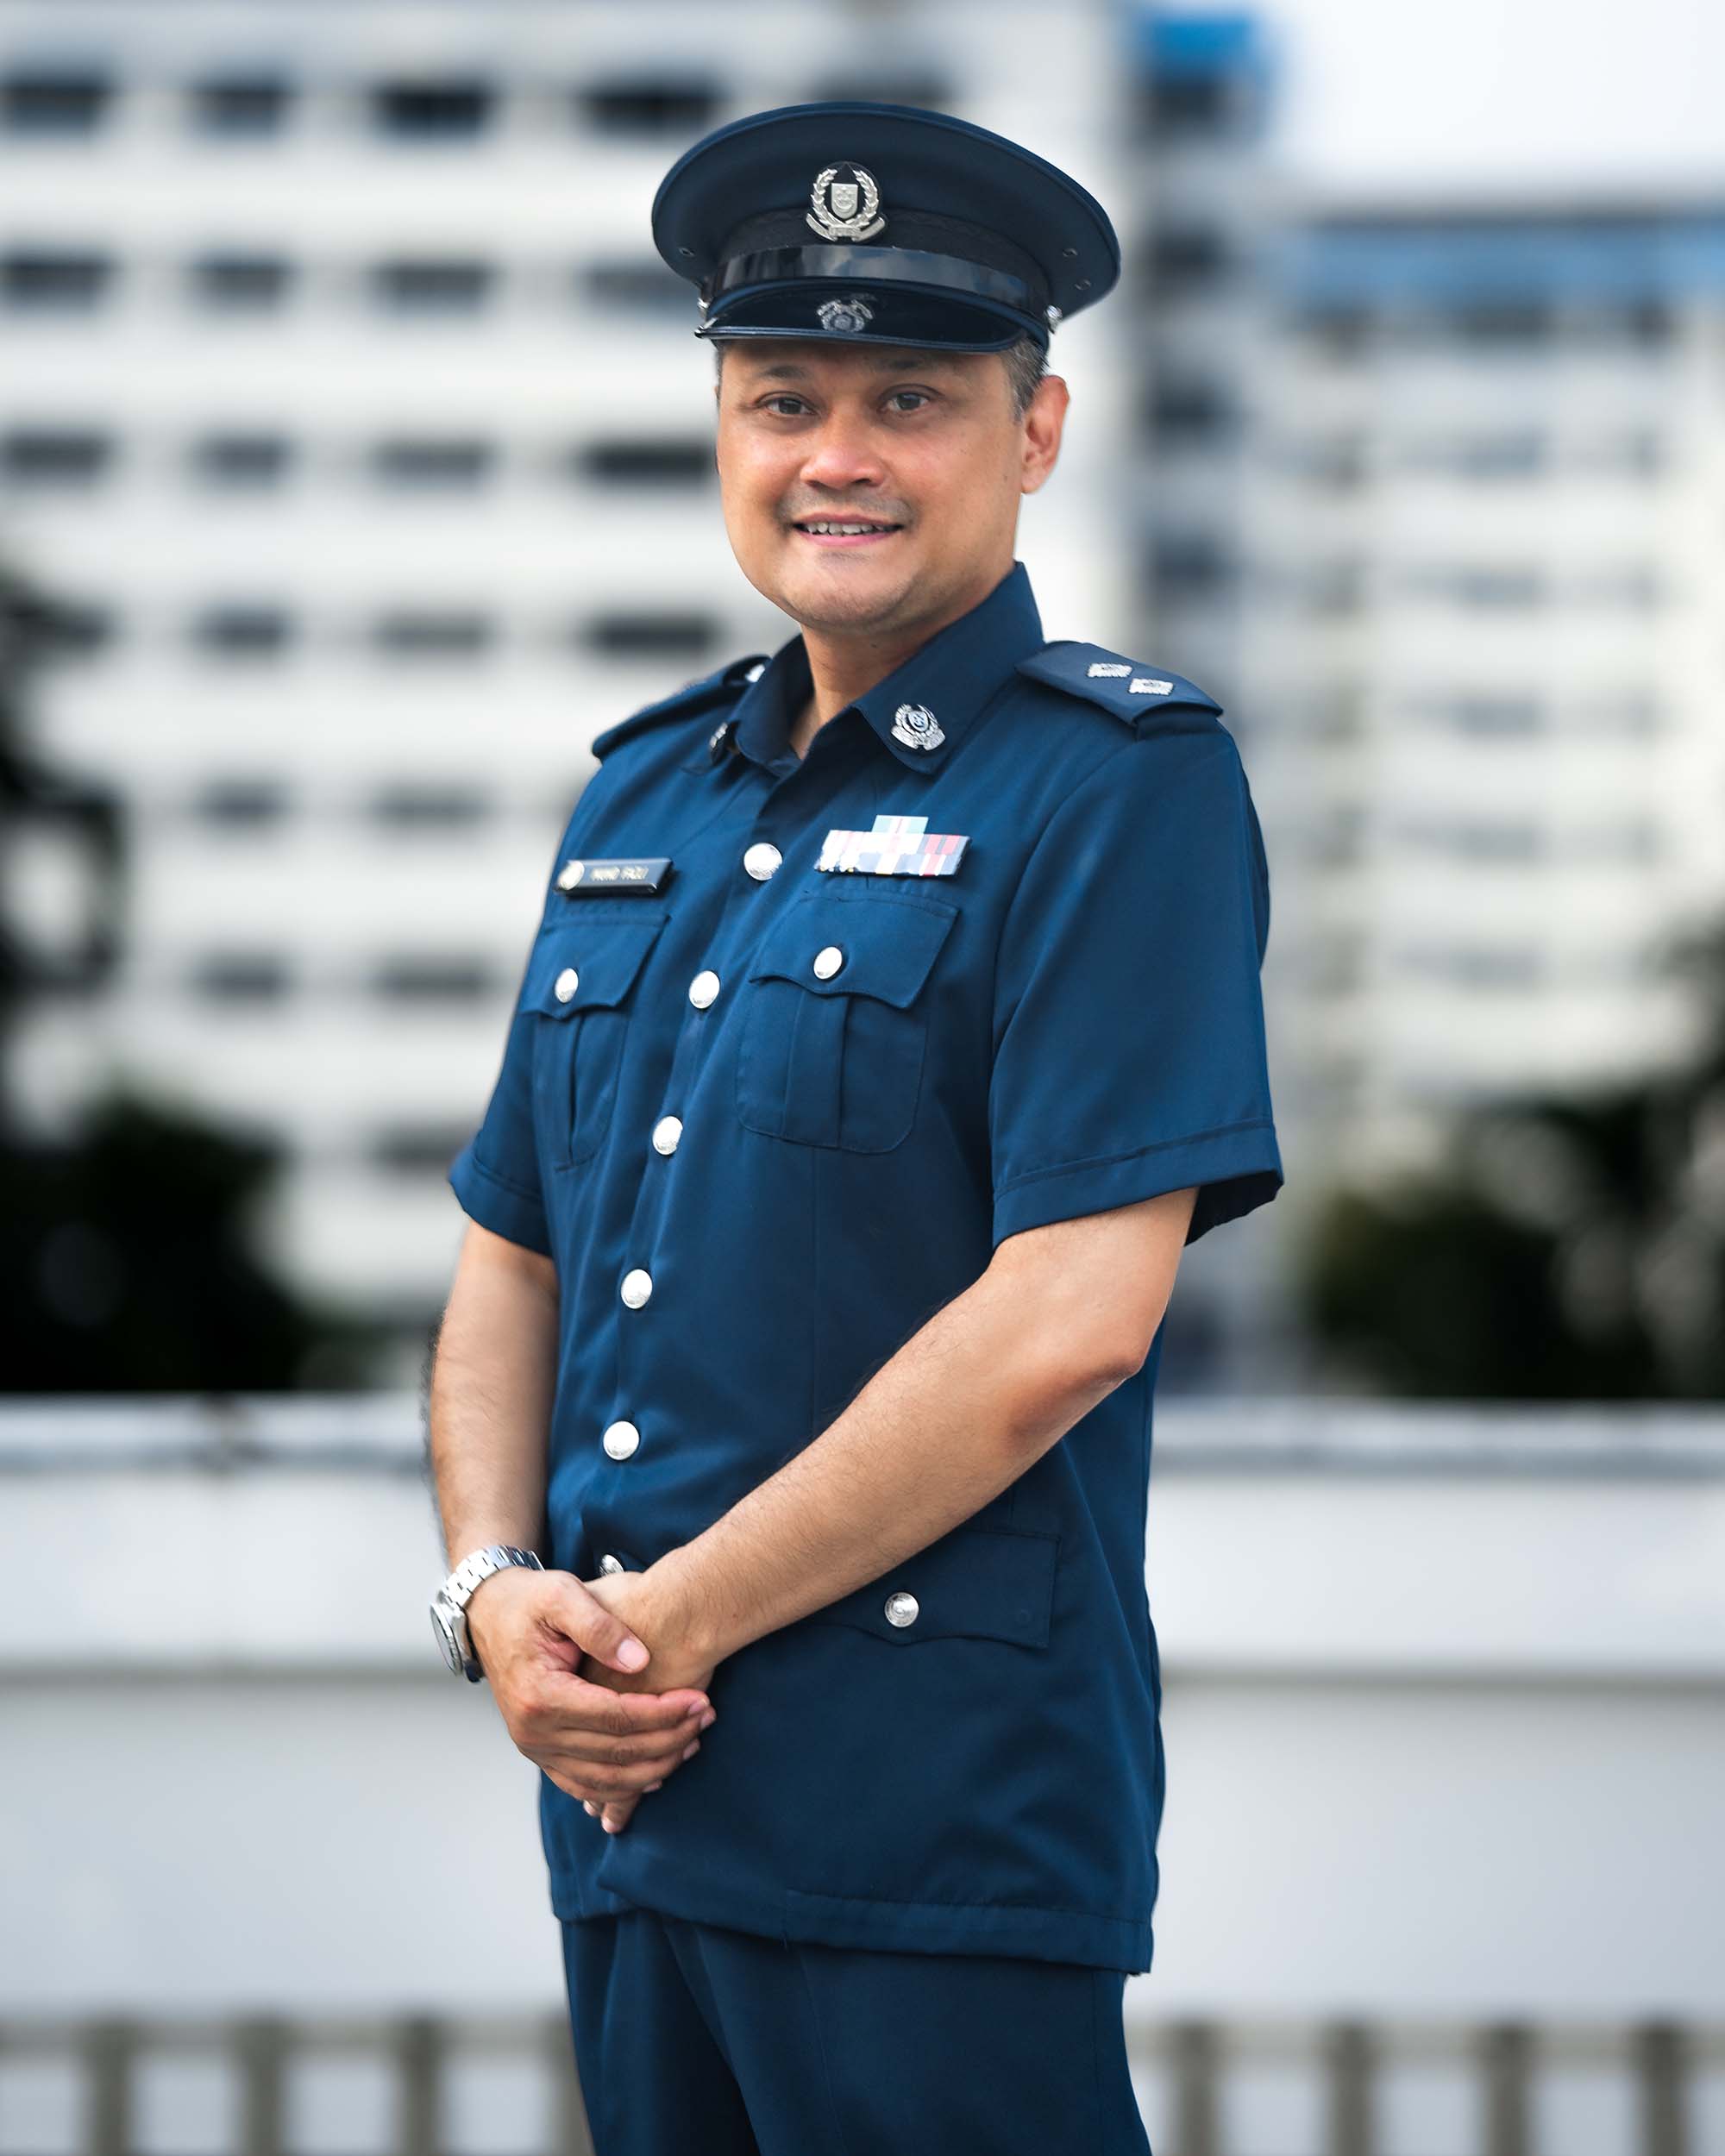 Insp Fazli joined the SPF in 1992 and is currently a Case Management Officer in the CID. PHOTOS: Soh Ying Jie